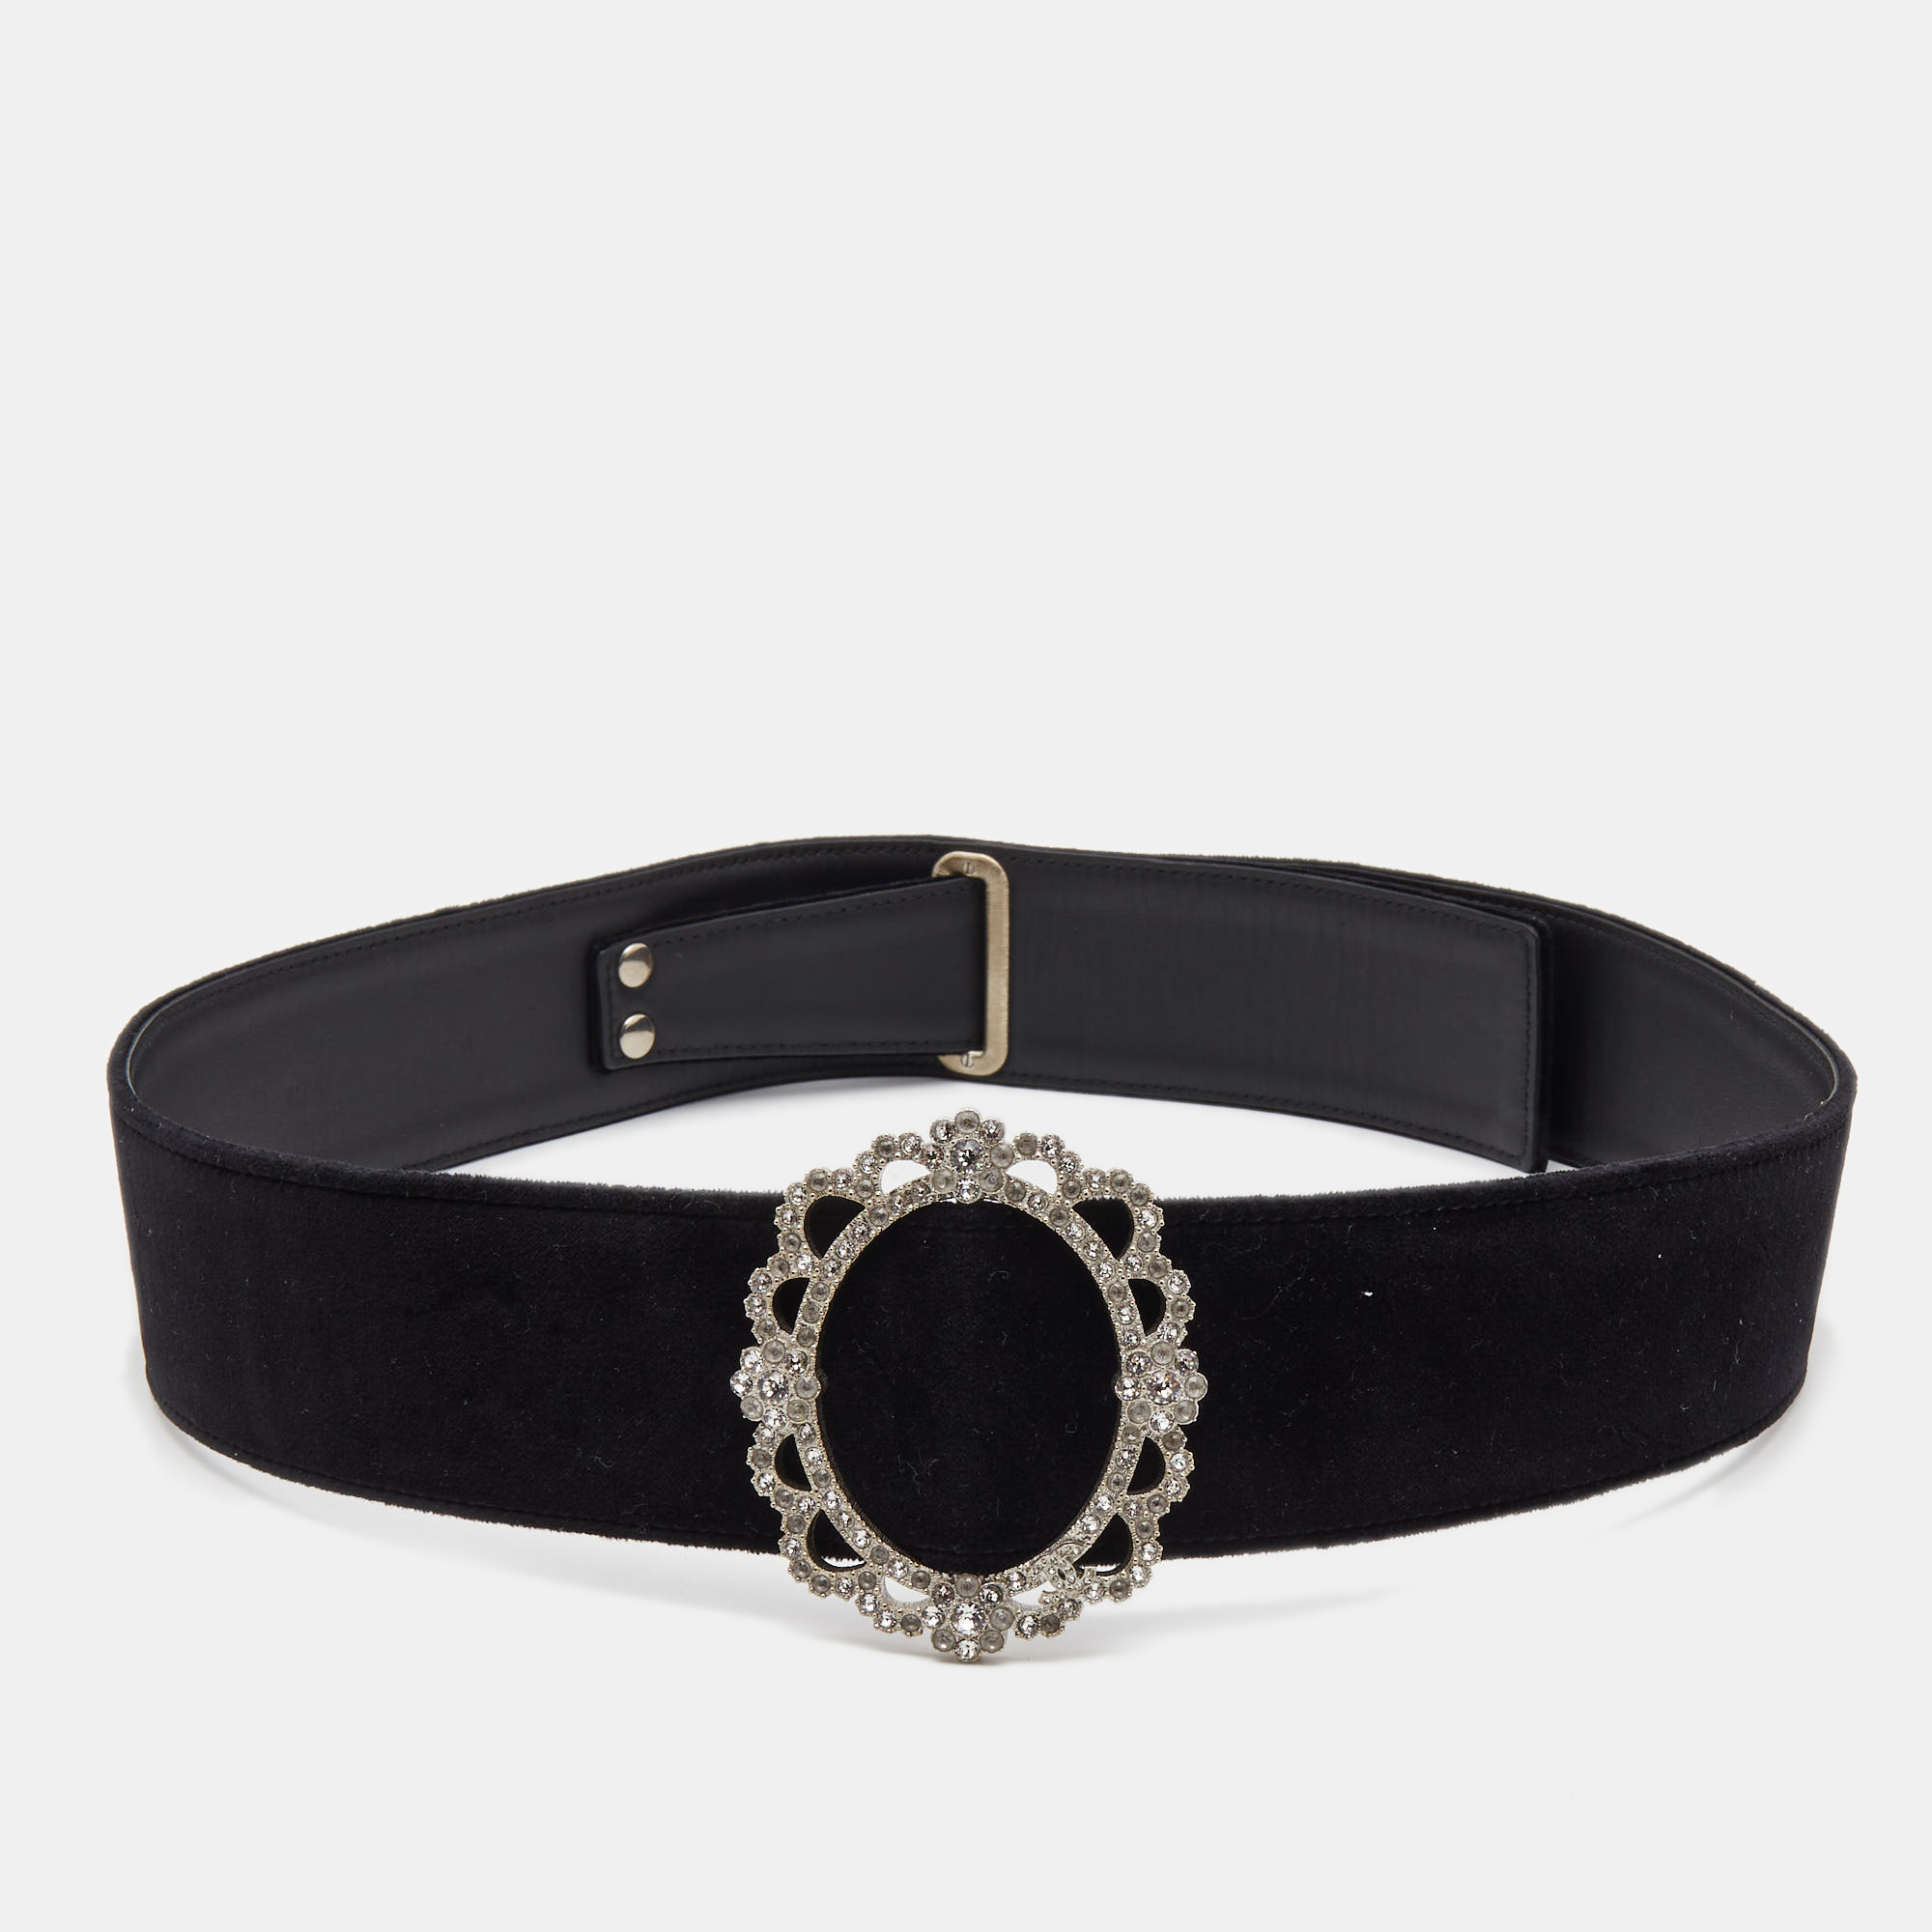 Let this belt be the newest addition to your collection of accessories. It is stylish durable and handy Designed by Chanel you can use this creation with a variety of outfits.